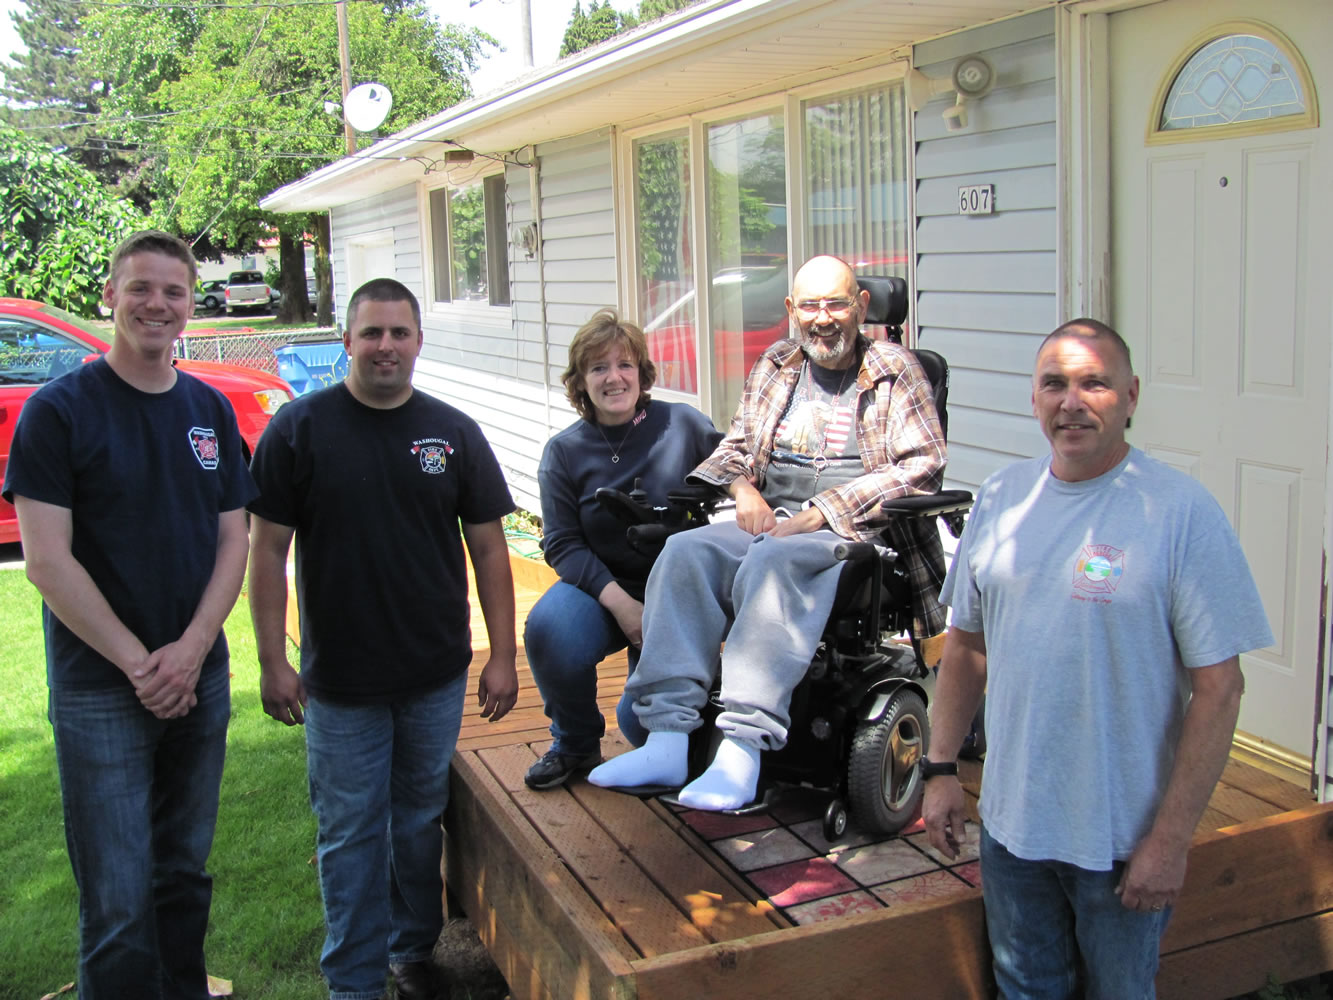 Several local fire officials recently coordinated the donation and installation of a ramp for Bob Dawson (second from right), who was diagnosed with ALS in 2013. Recently appearing with him were Jordan Boldt, Jake Grindy, Dawson's wife Charlie, and Joe Scheer. Charlie has served as a Washougal volunteer firefighter for more than 23 years. &quot;They shocked us,&quot; Charlie said, regarding the addition of a ramp.